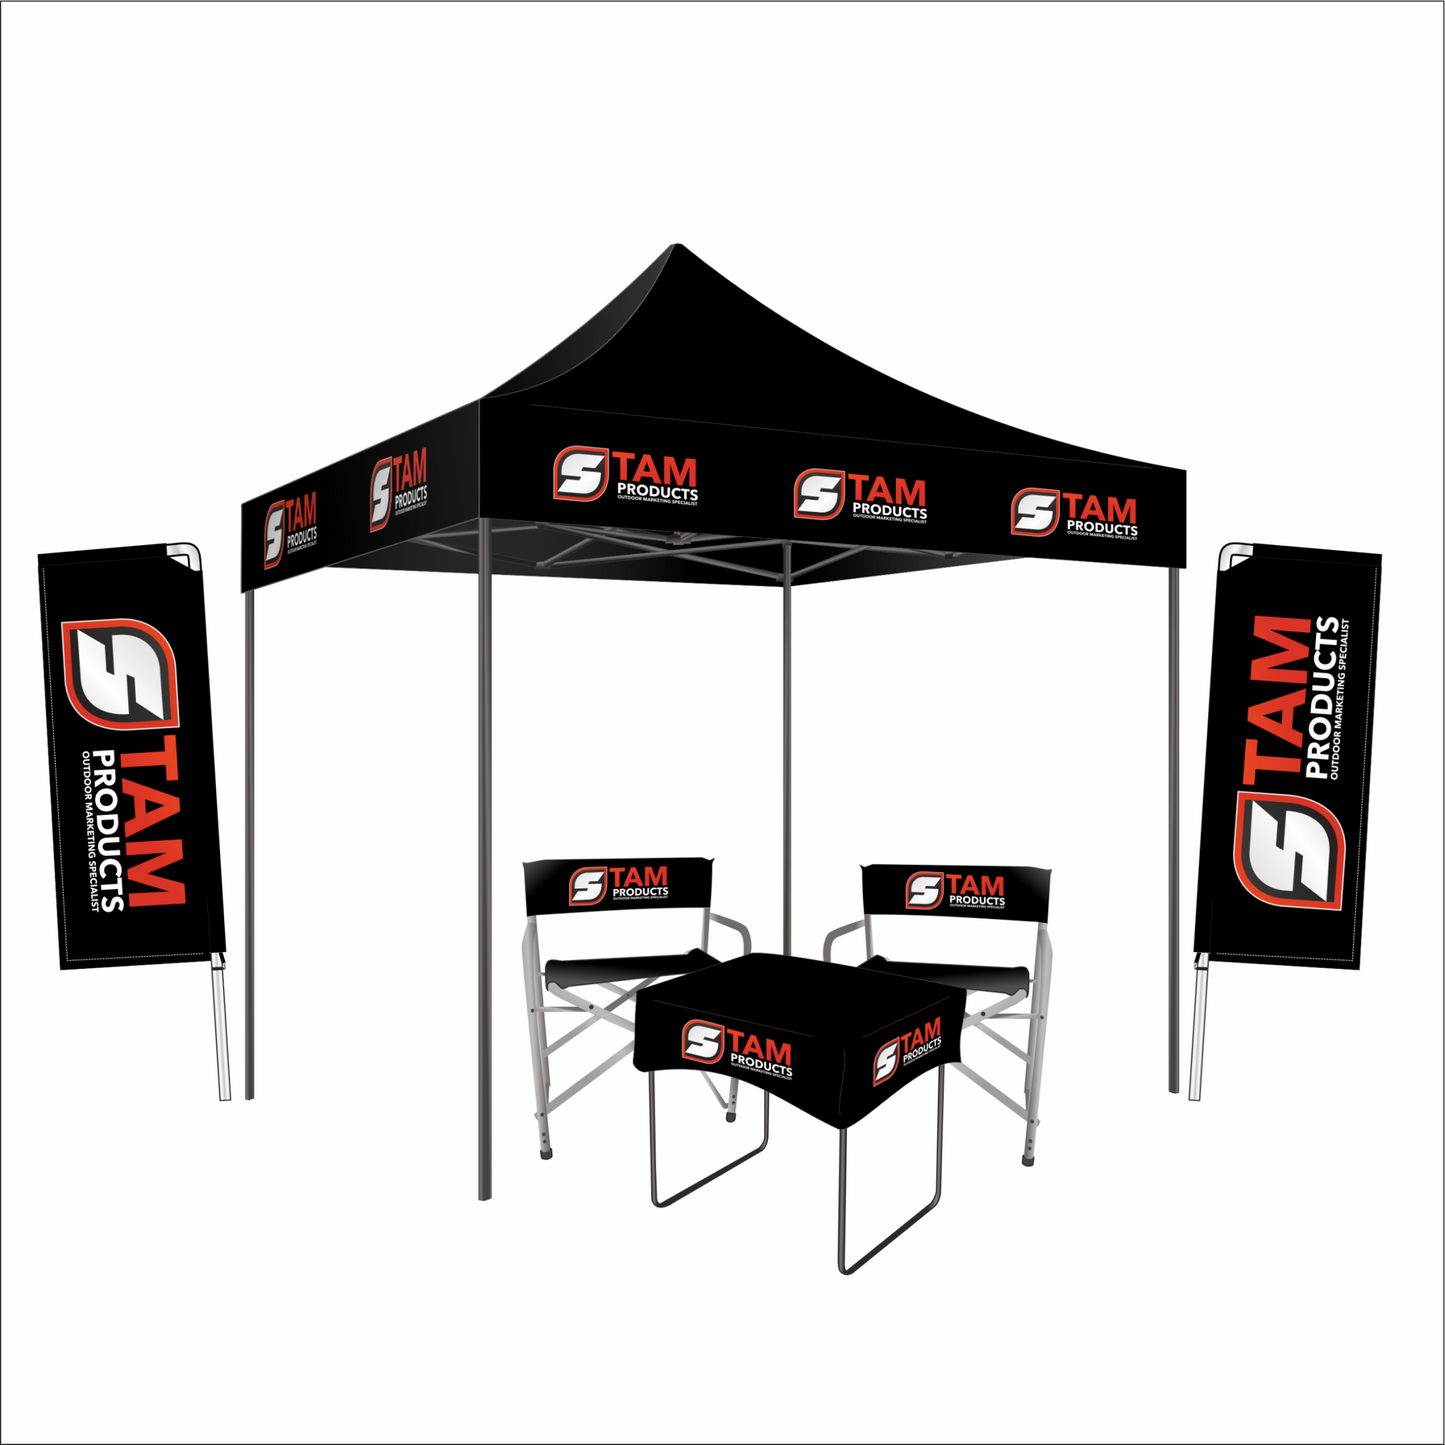 Branded gazebo, flags and banners Mini Combo